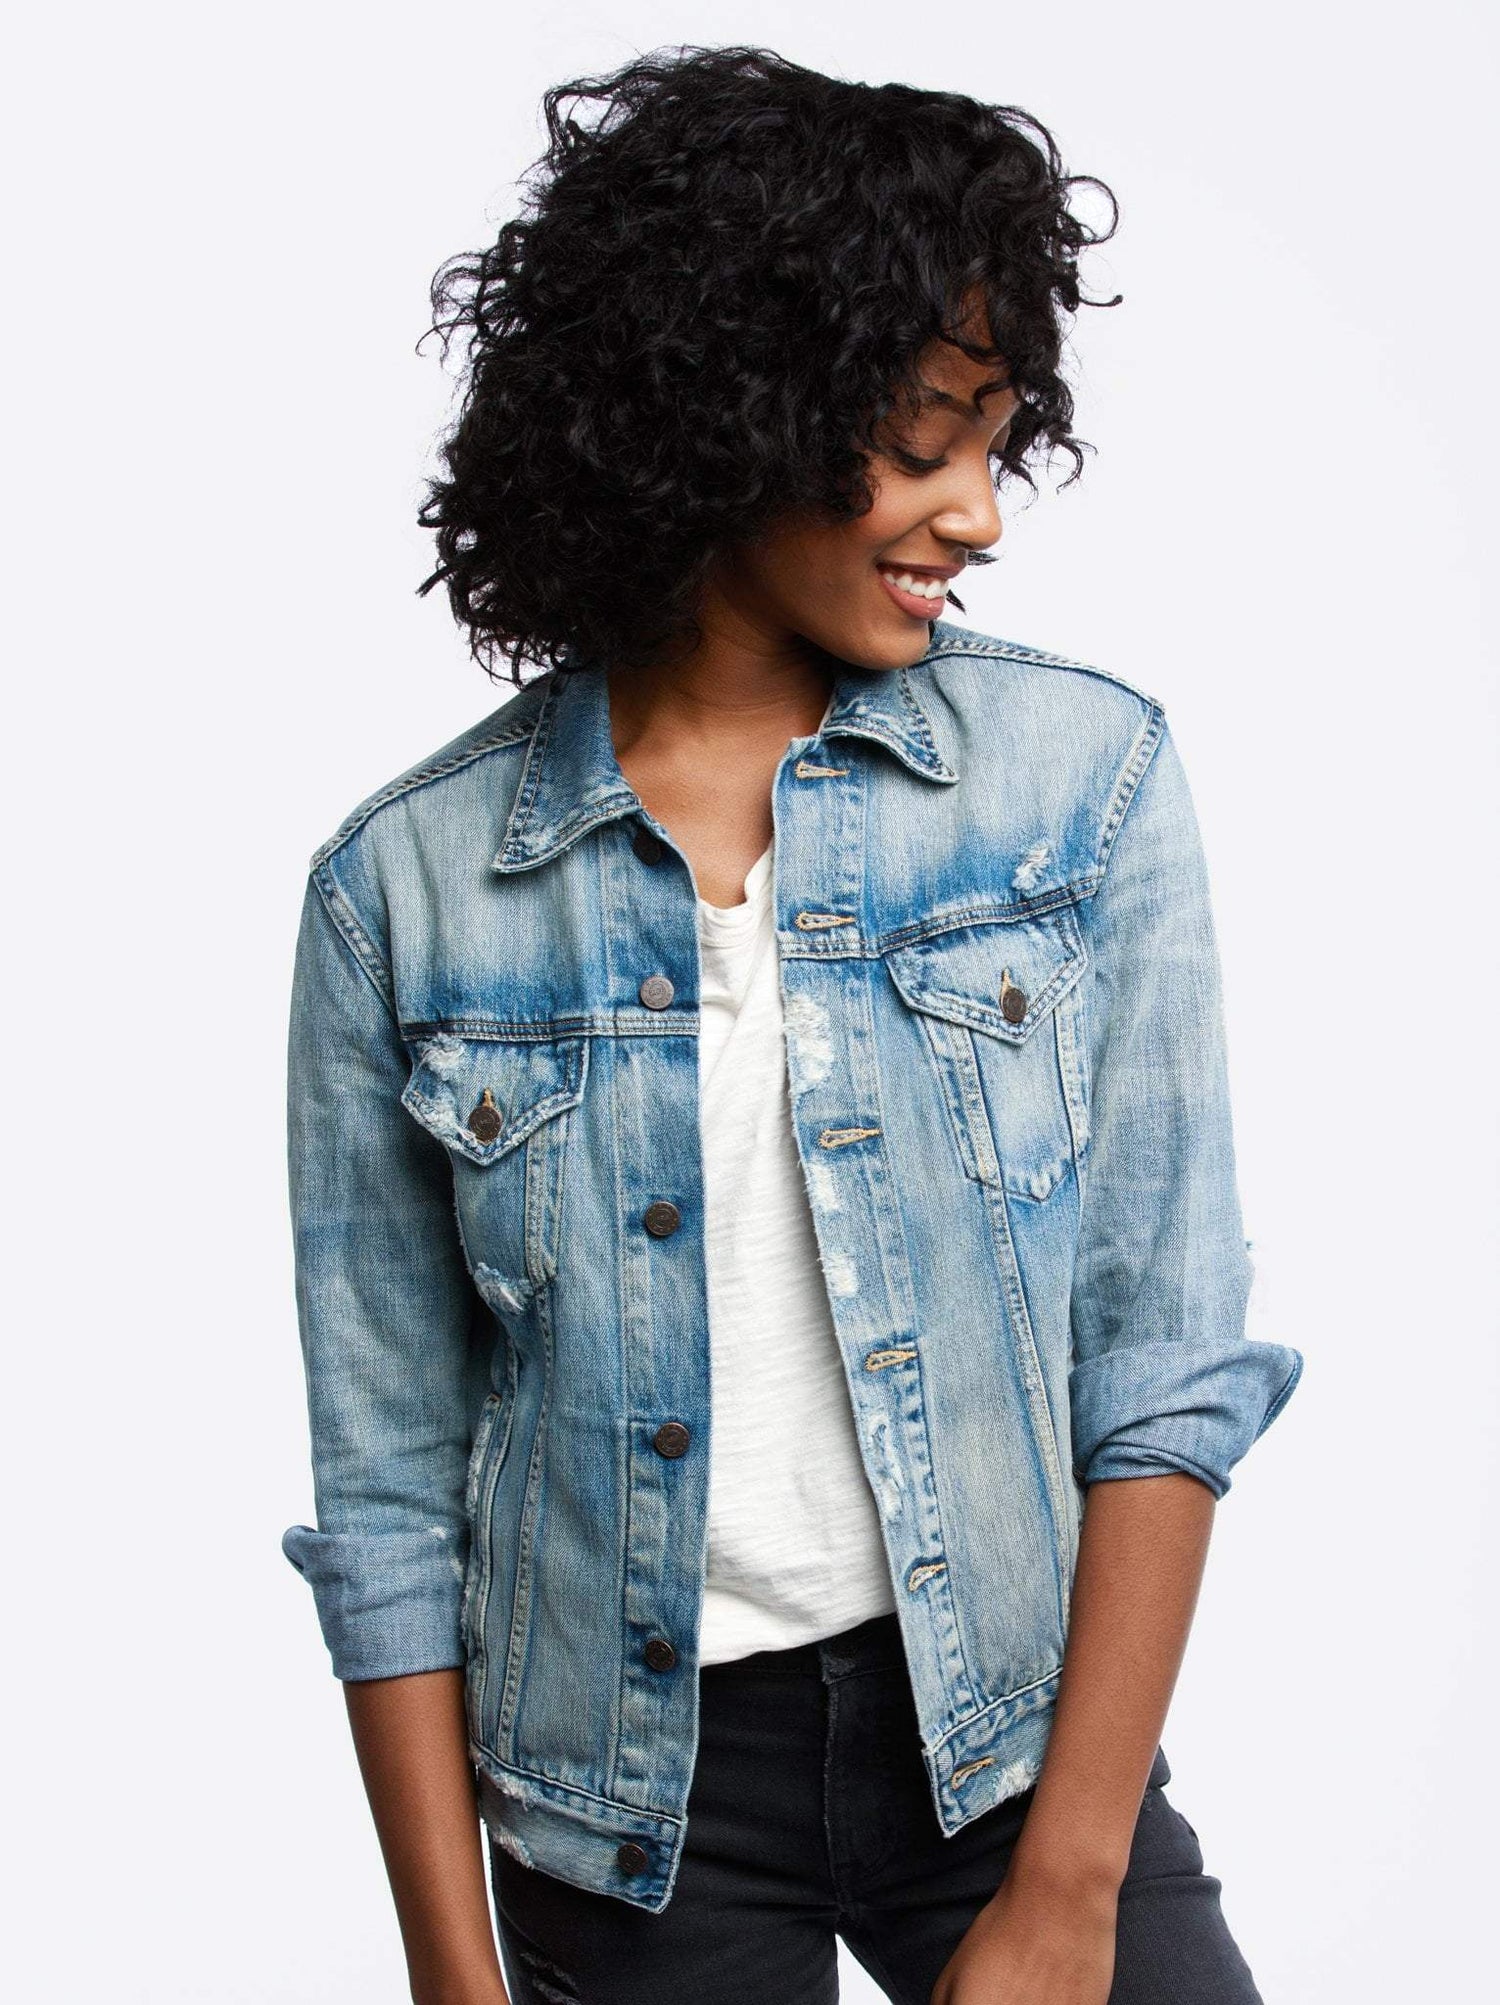 Able Merly Jean Jacket Outerwear in Merly at Wrapsody